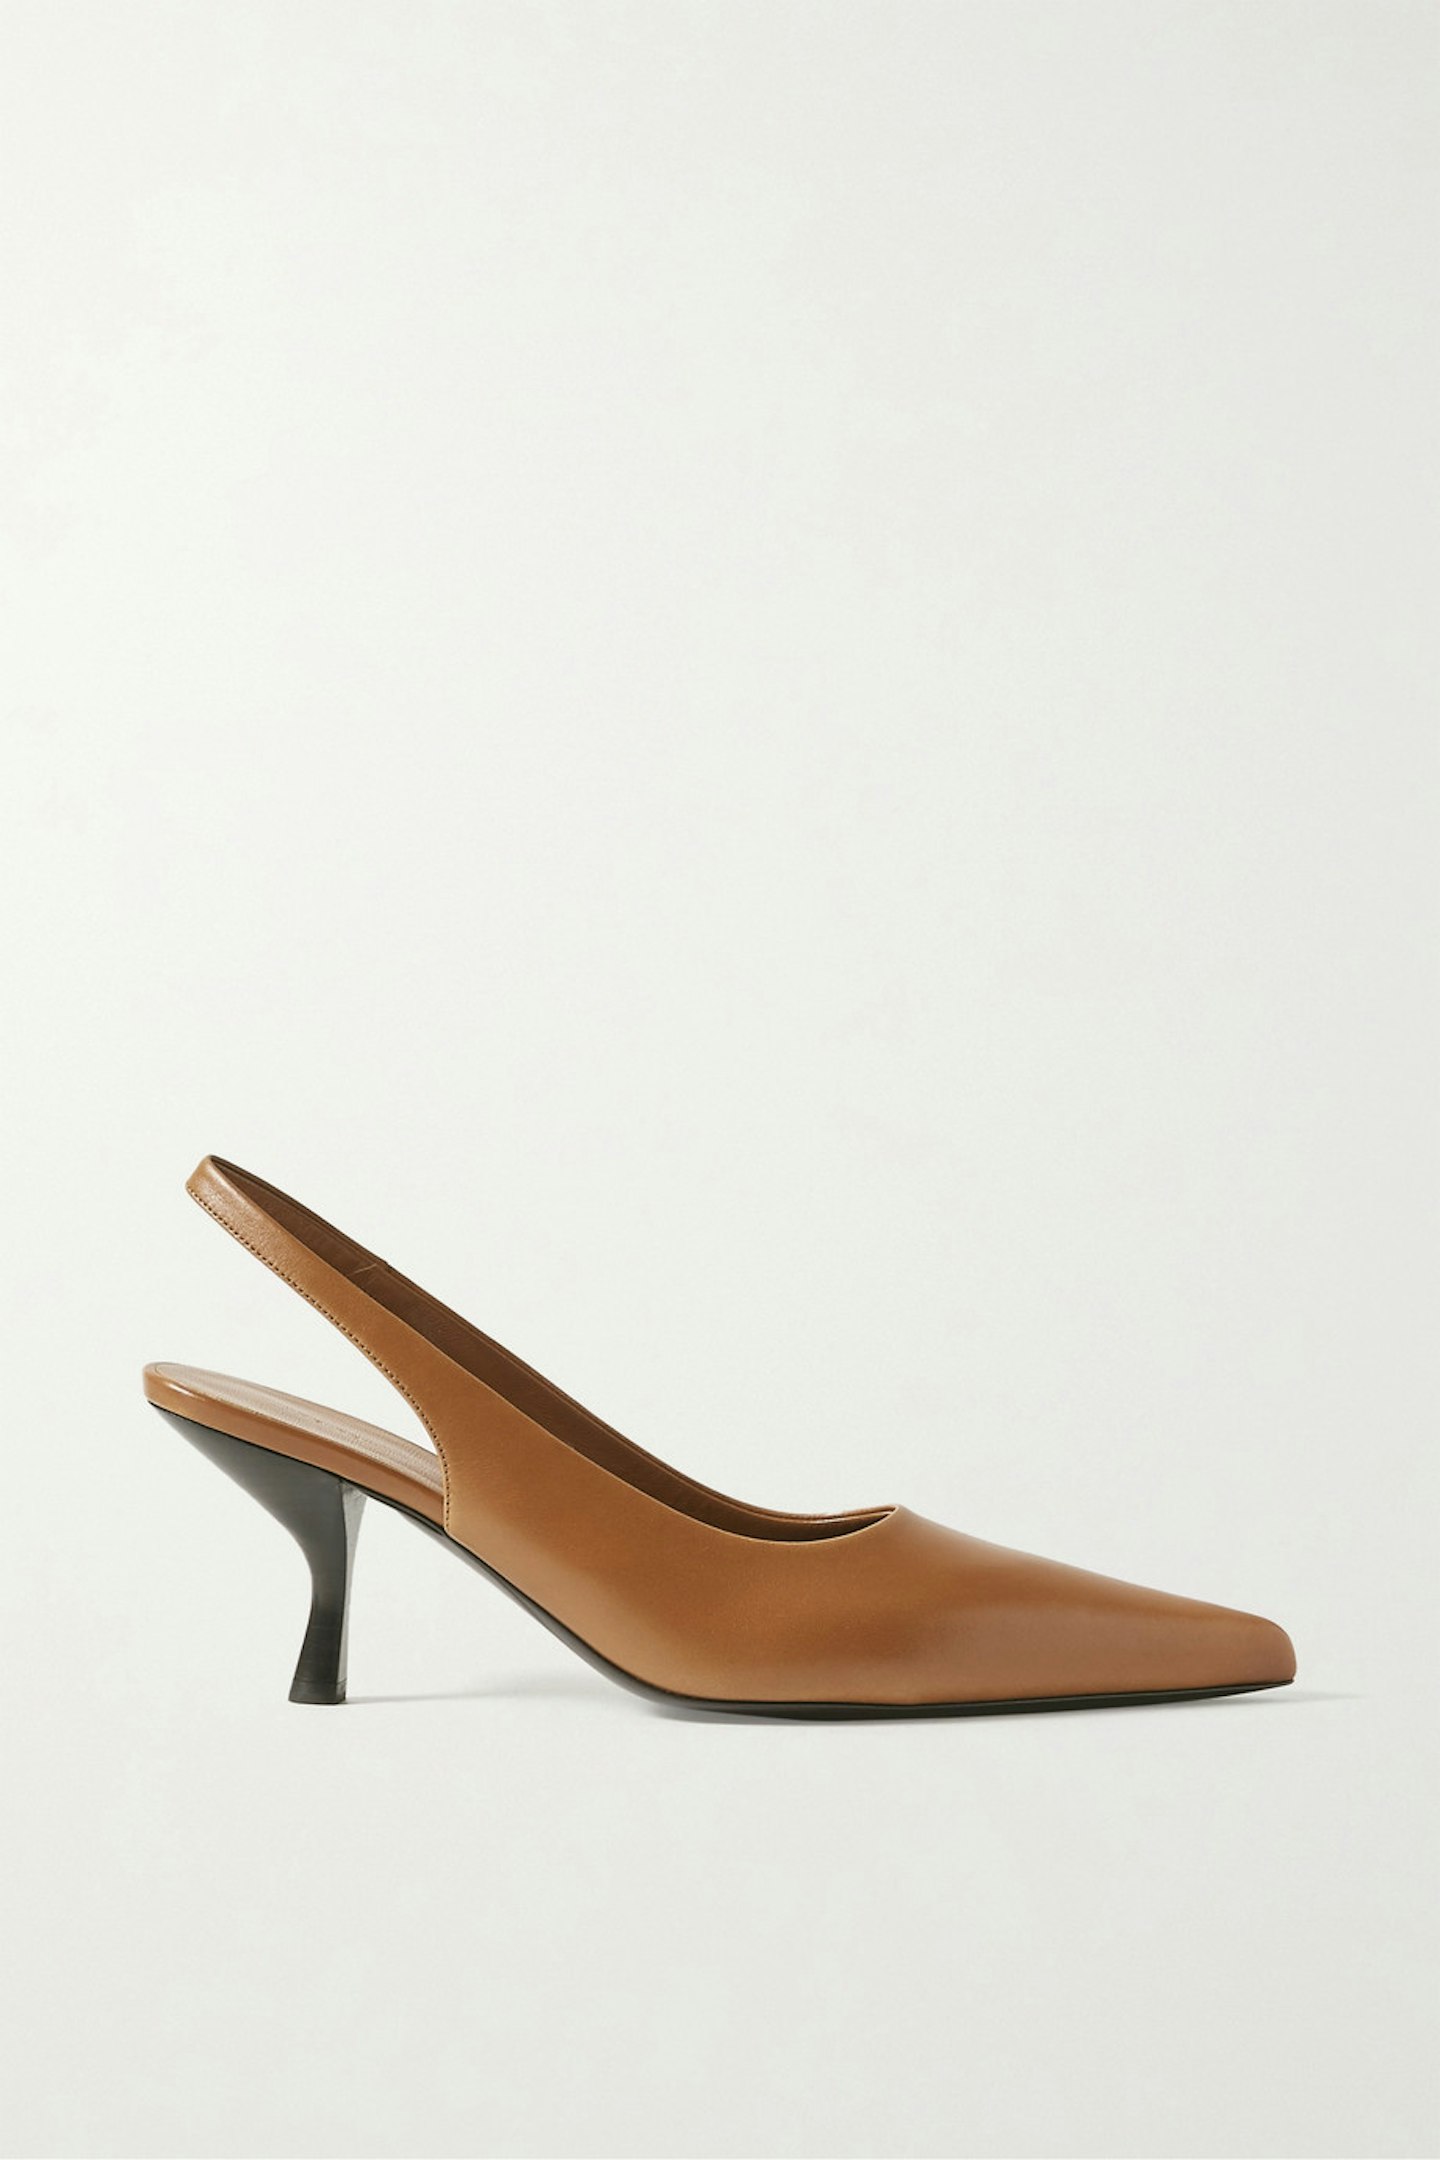 Bourgeoise Leather Slingback Pumps, £700, The Row at Net-a-Porter